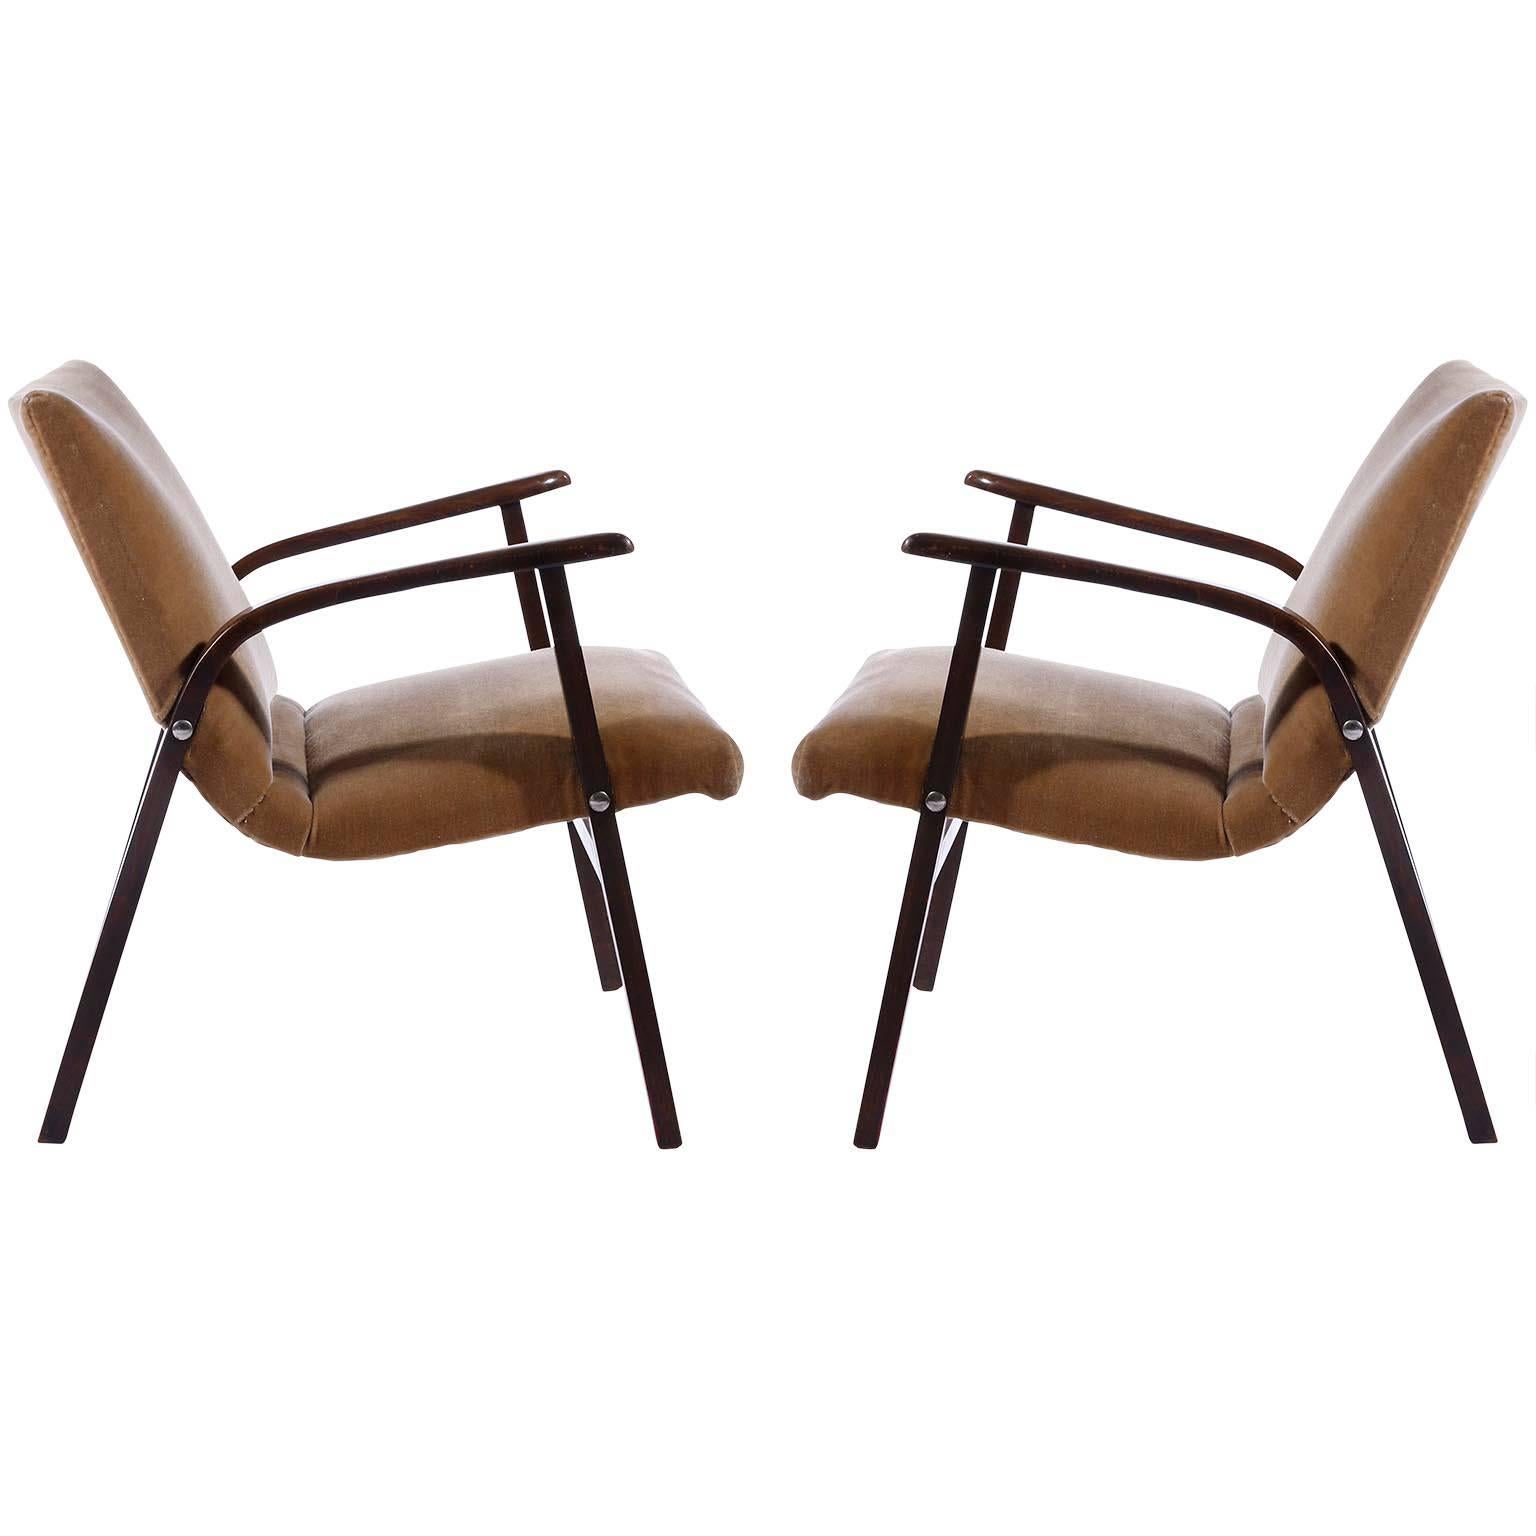 A pair of midcentury lounge chairs designed by Roland Rainer for the Cafe Ritter in Vienna, Austria, in 1952 and manufactured by Emil & Alfred Pollak.
The chairs are in very good condition. Most likely they were reupholstered with high quality